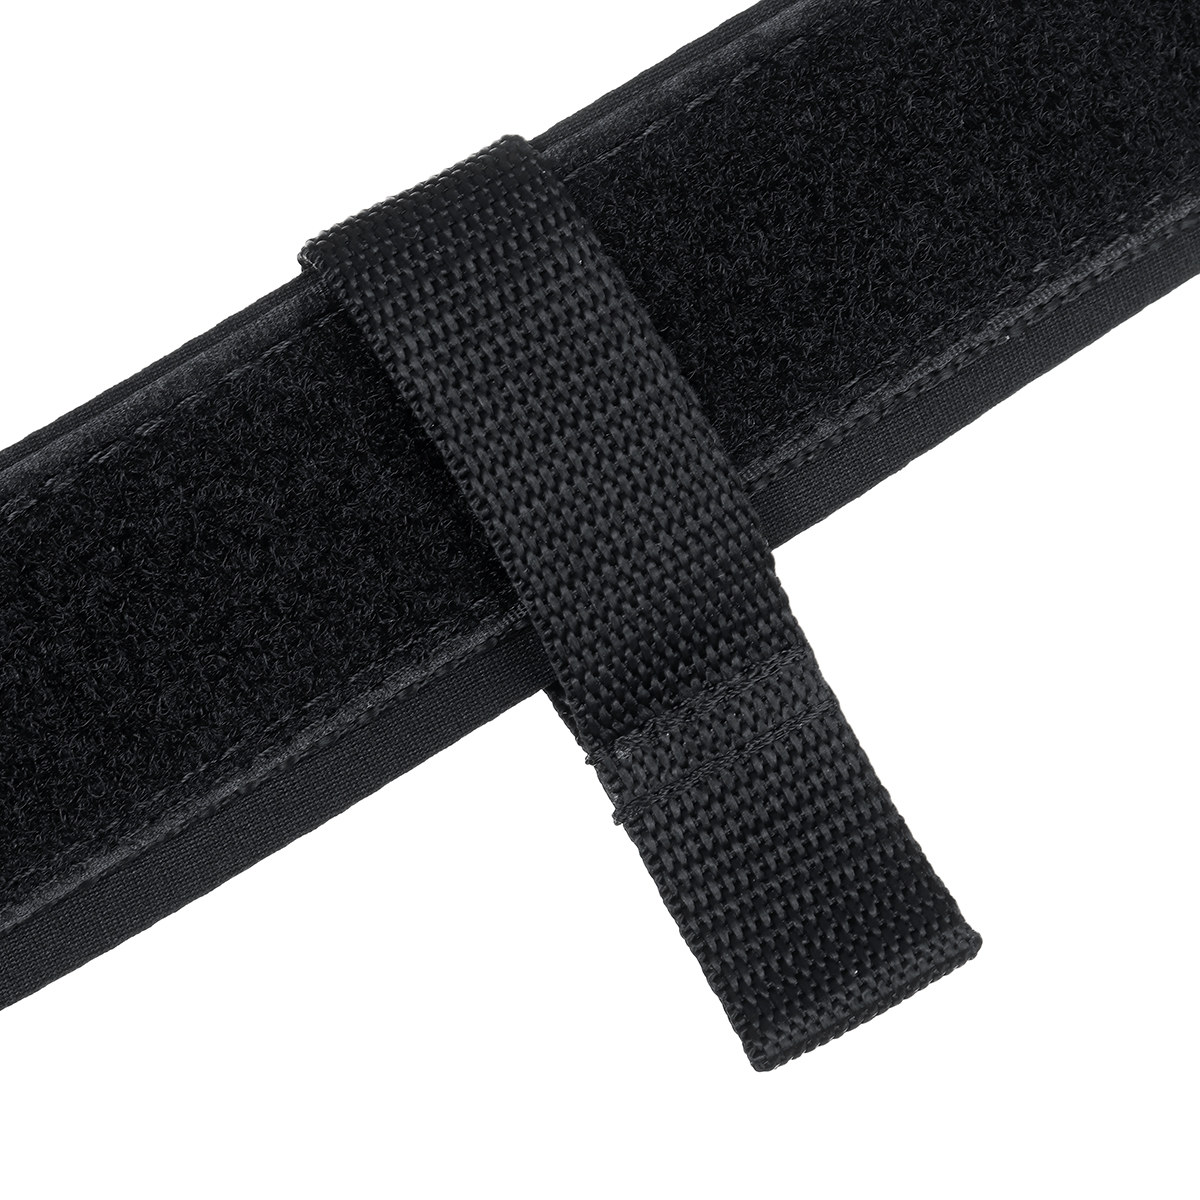 234x6x10m-Black-Swimming-Resistance-Bands-Swim-Training-Belts-Harness-Static-Swimming-Exercise-with--1700511-7